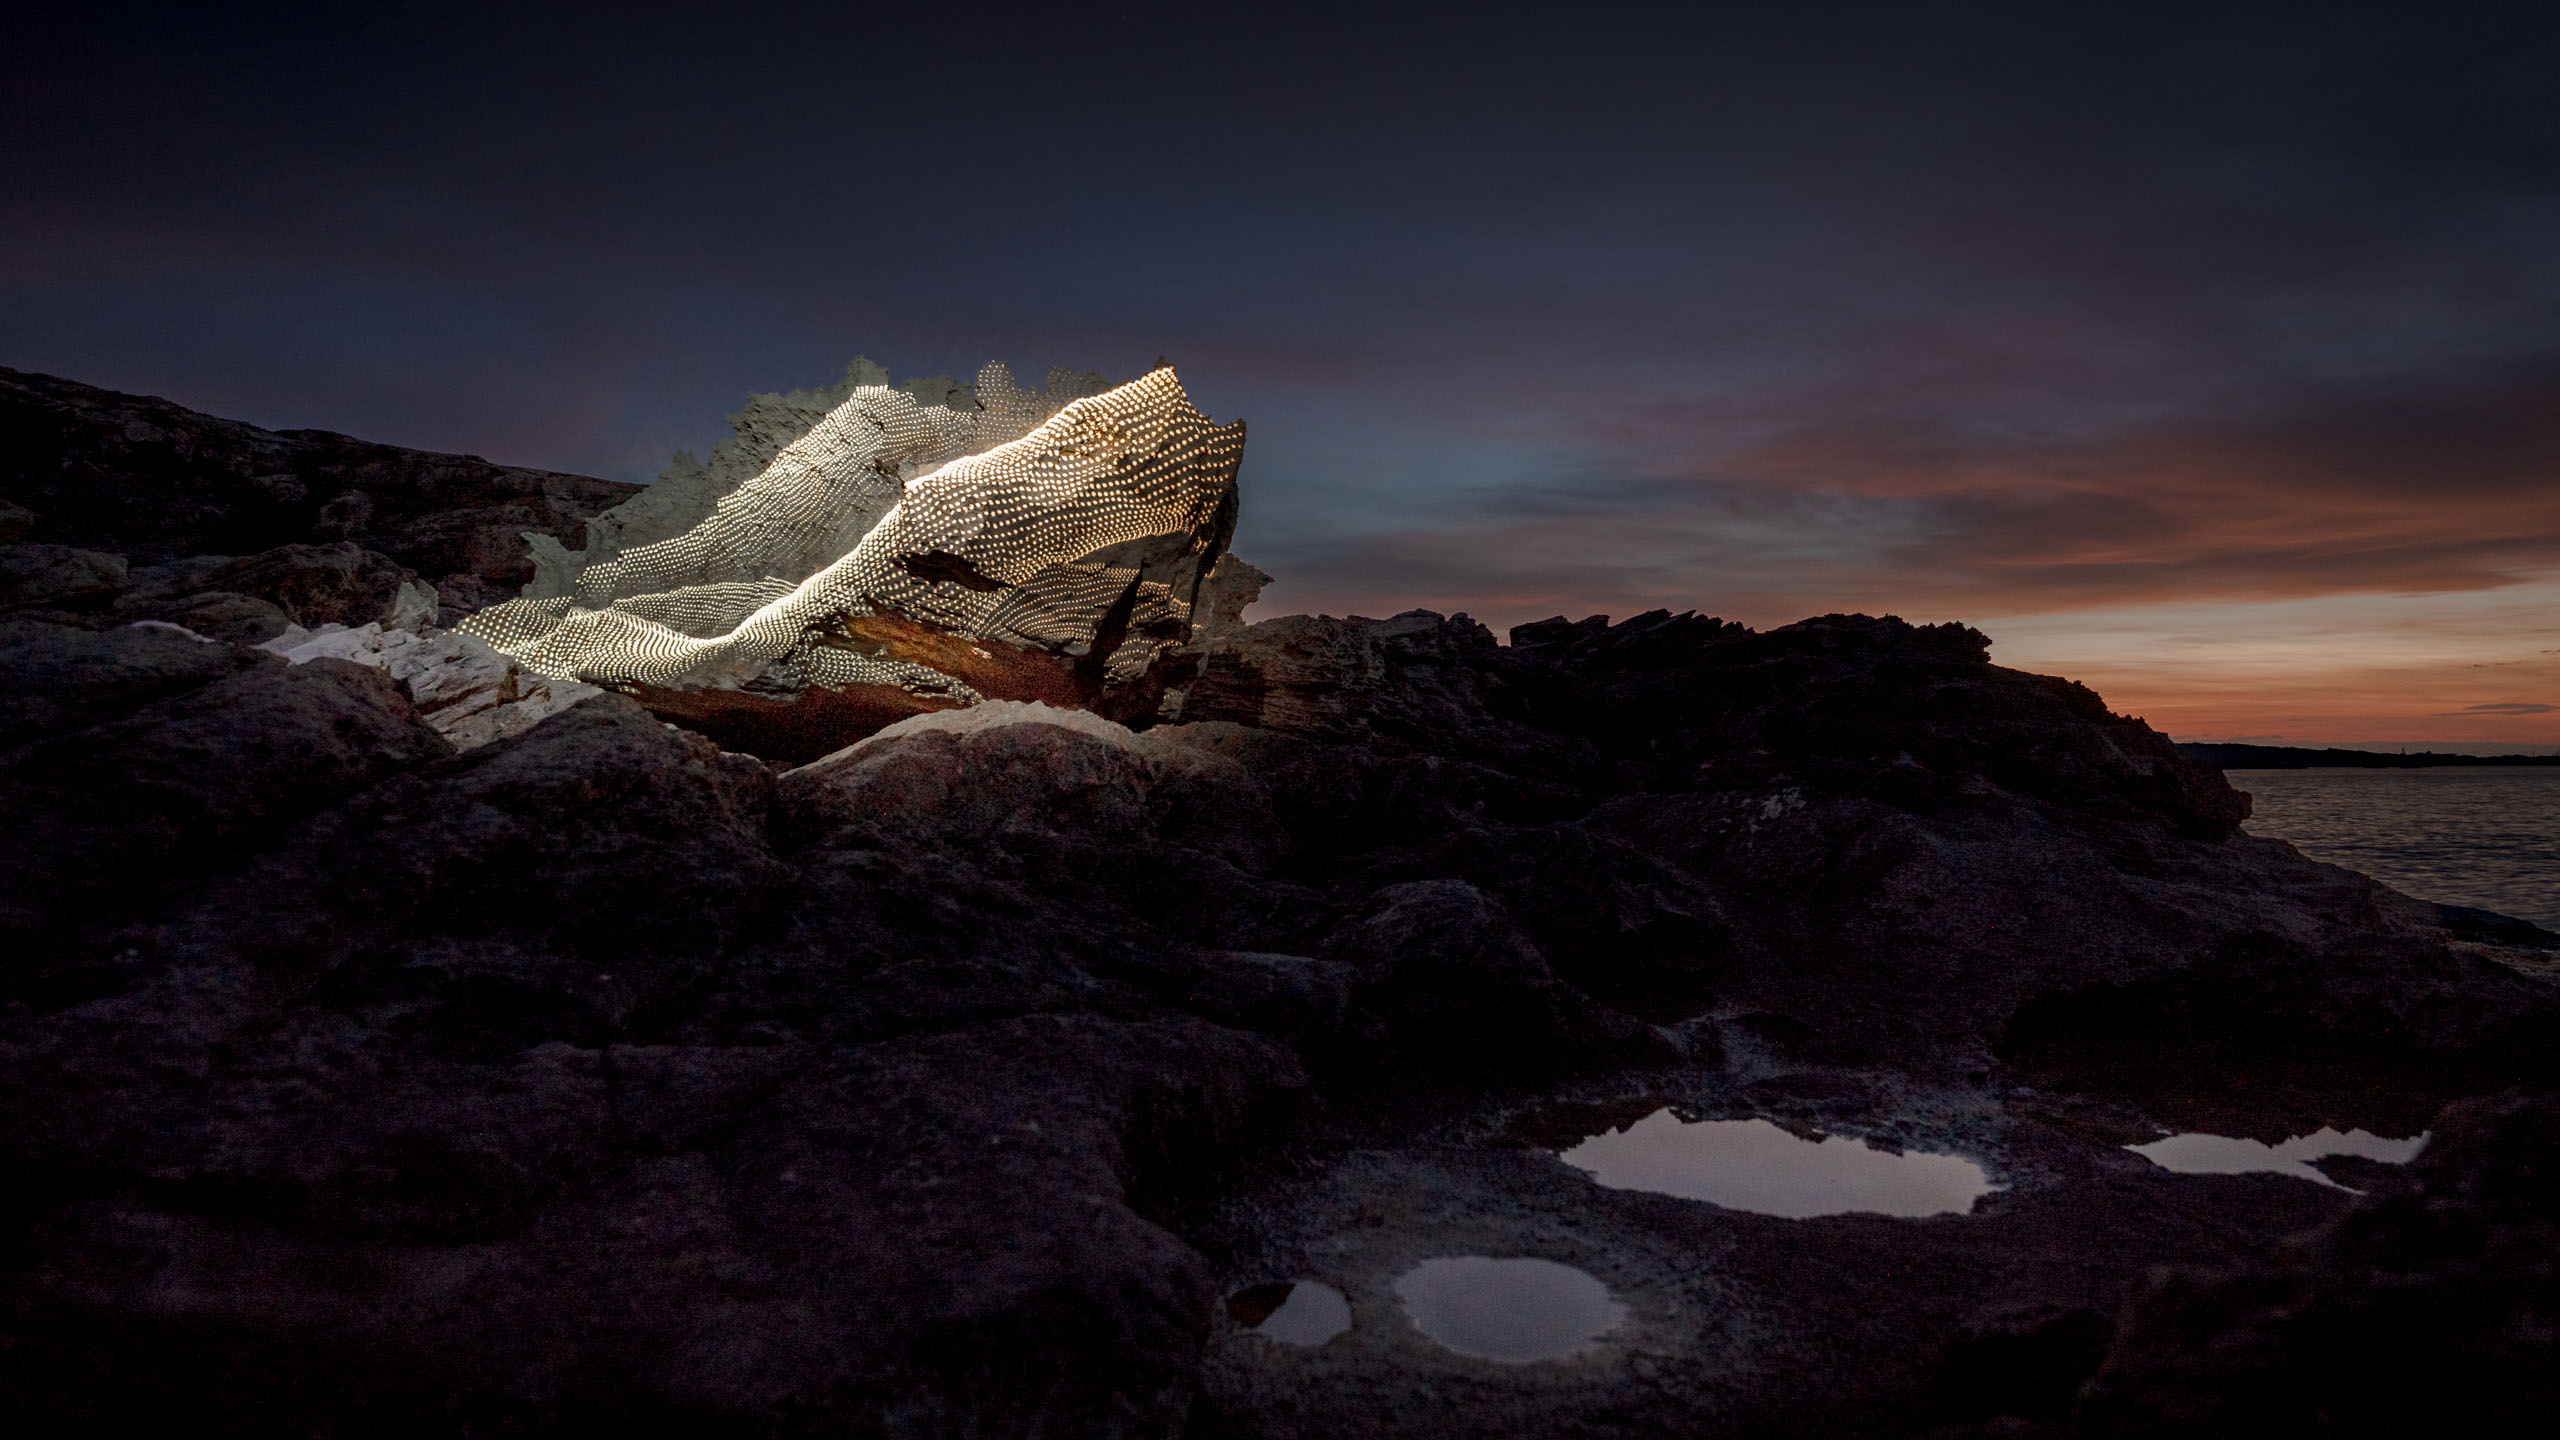 Light art videomapping projections on a beautiful boulder in a surreal landscape ion the sea coast